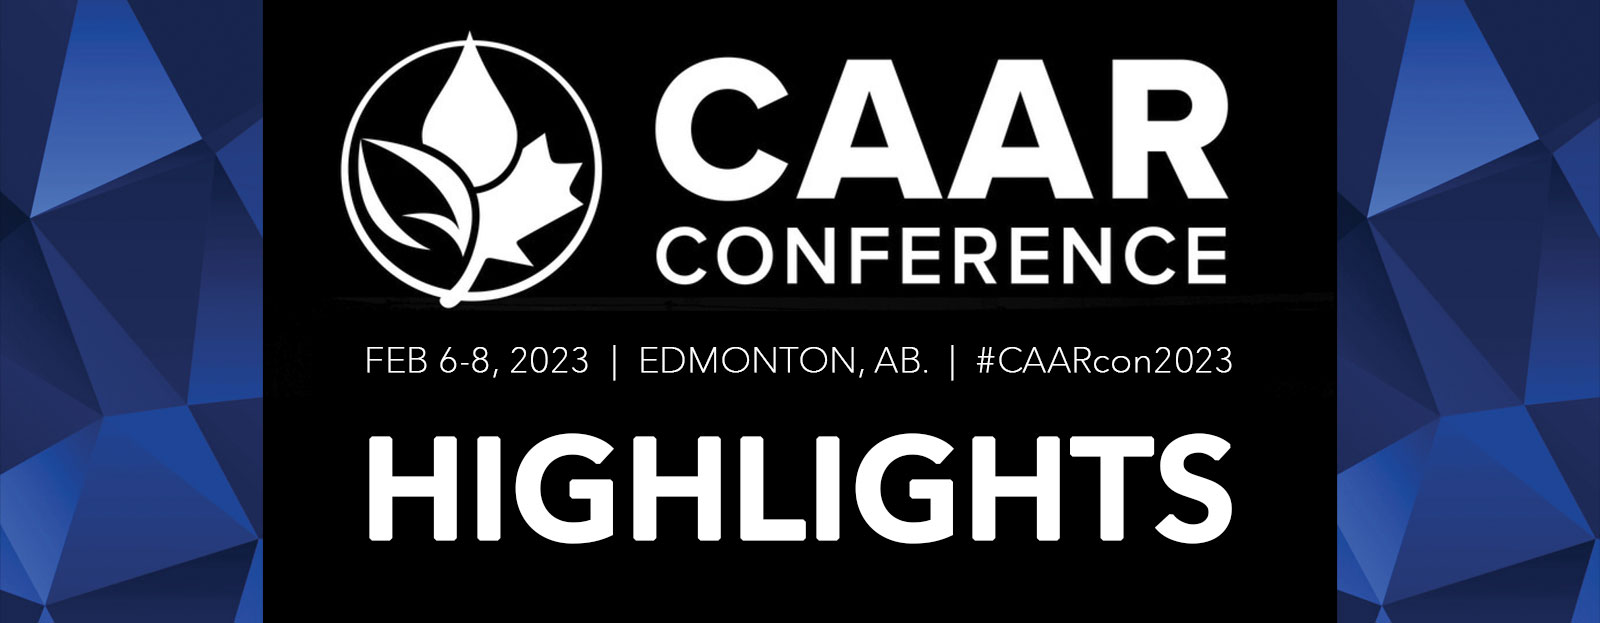 Banner for 2023 CAAR Conference Highlights